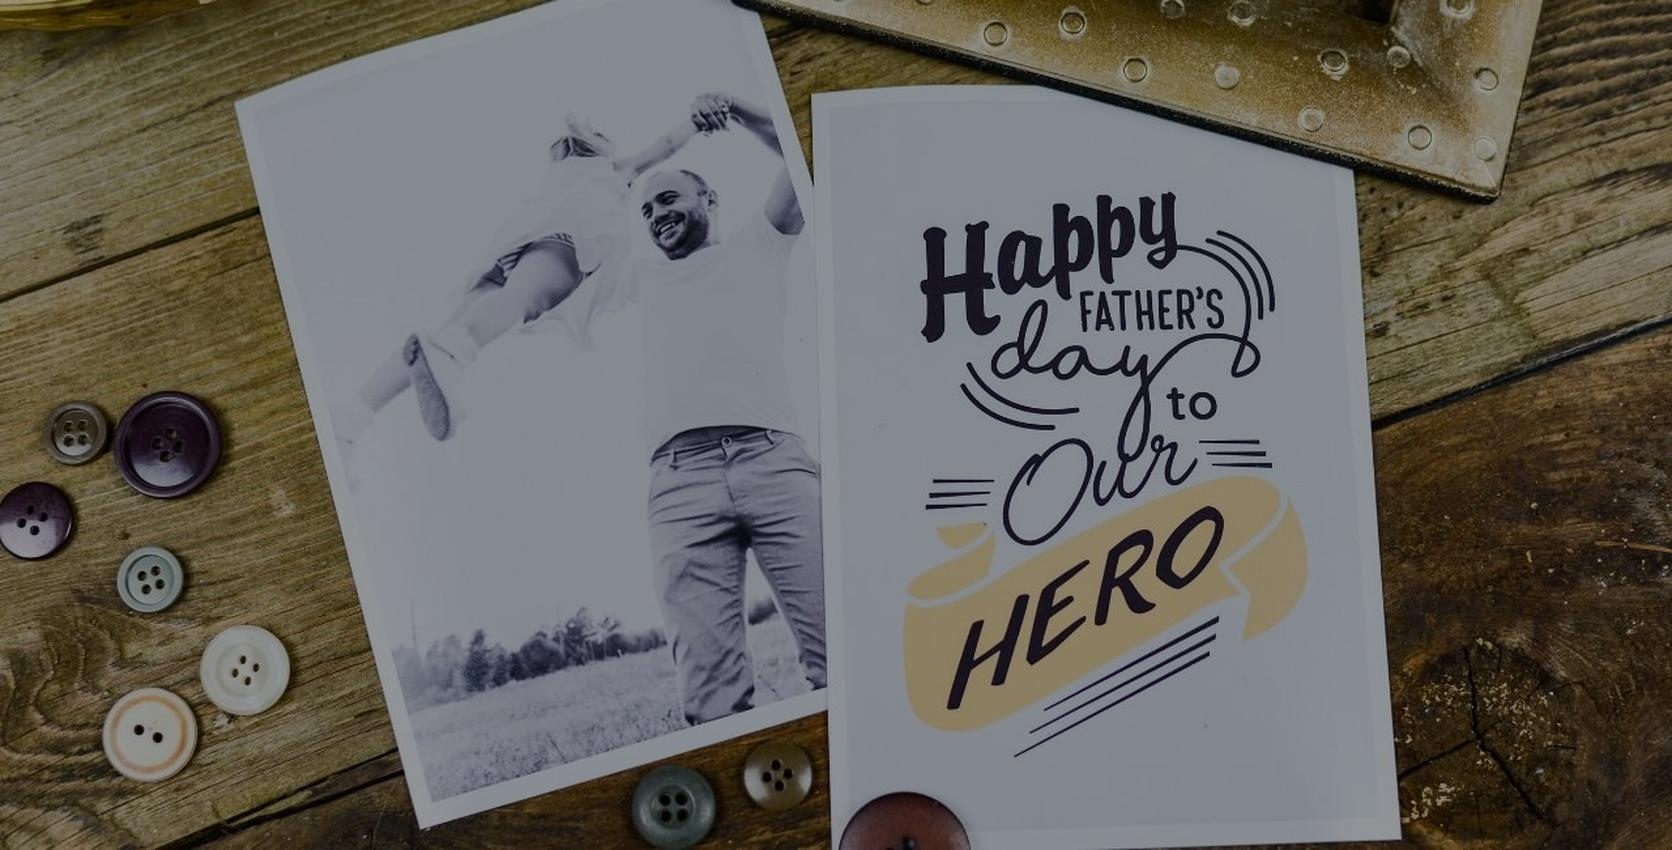 Wish Dad a Happy Father's Day With These Heartfelt Sayings